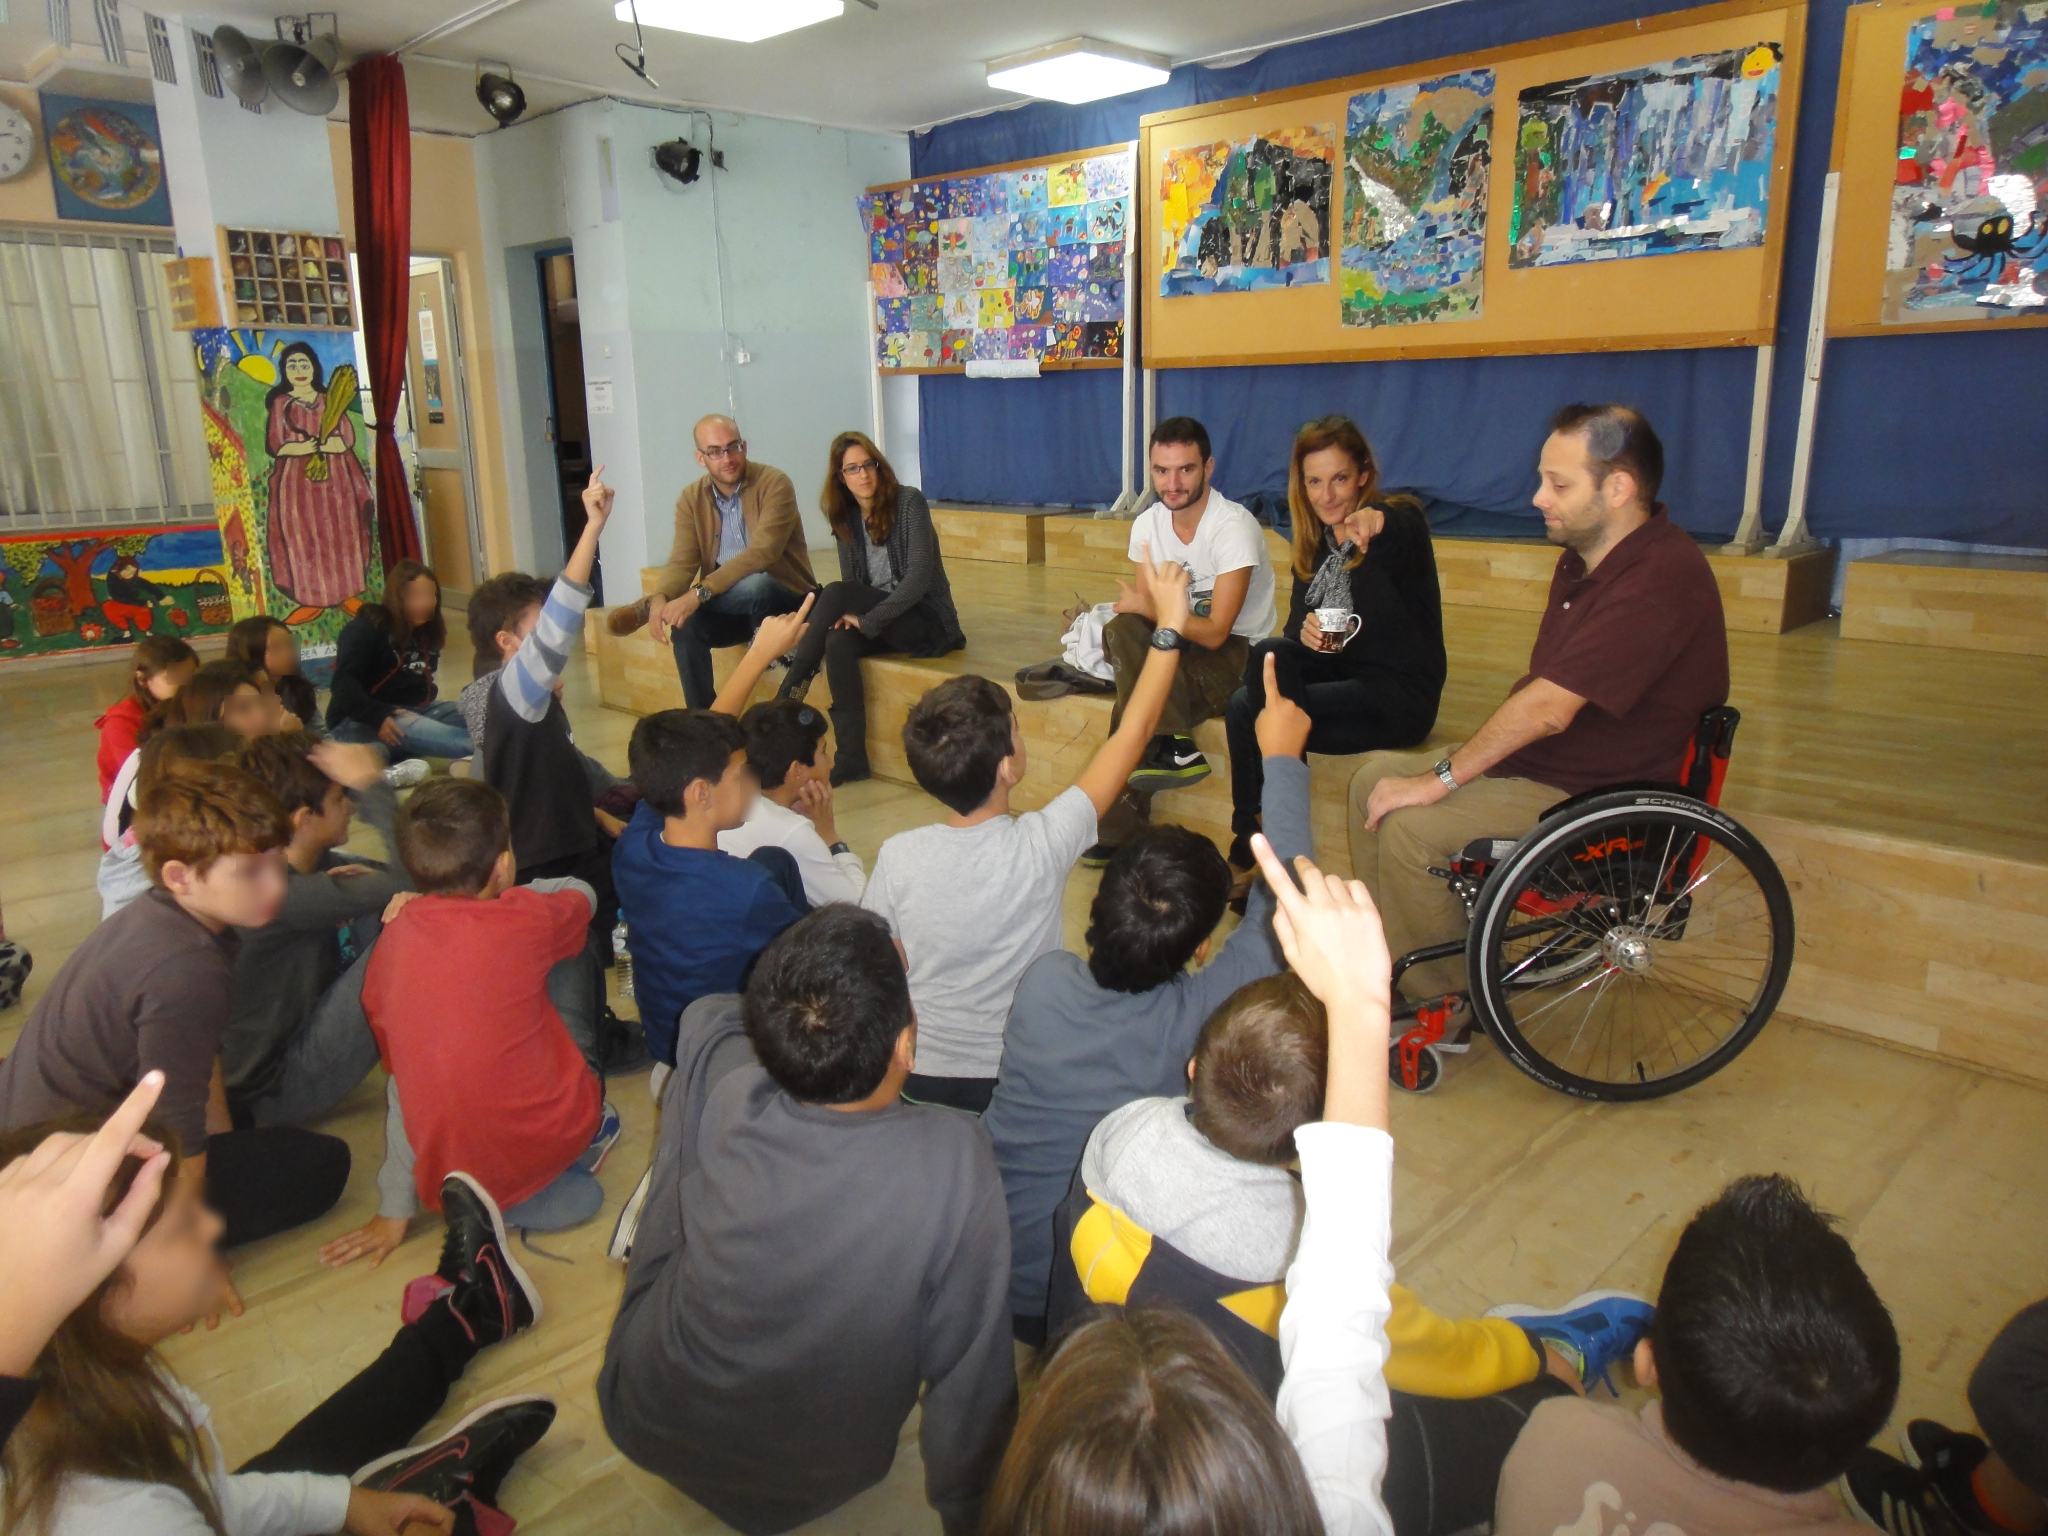 A man in a wheel chair giving a presentation to a group of students